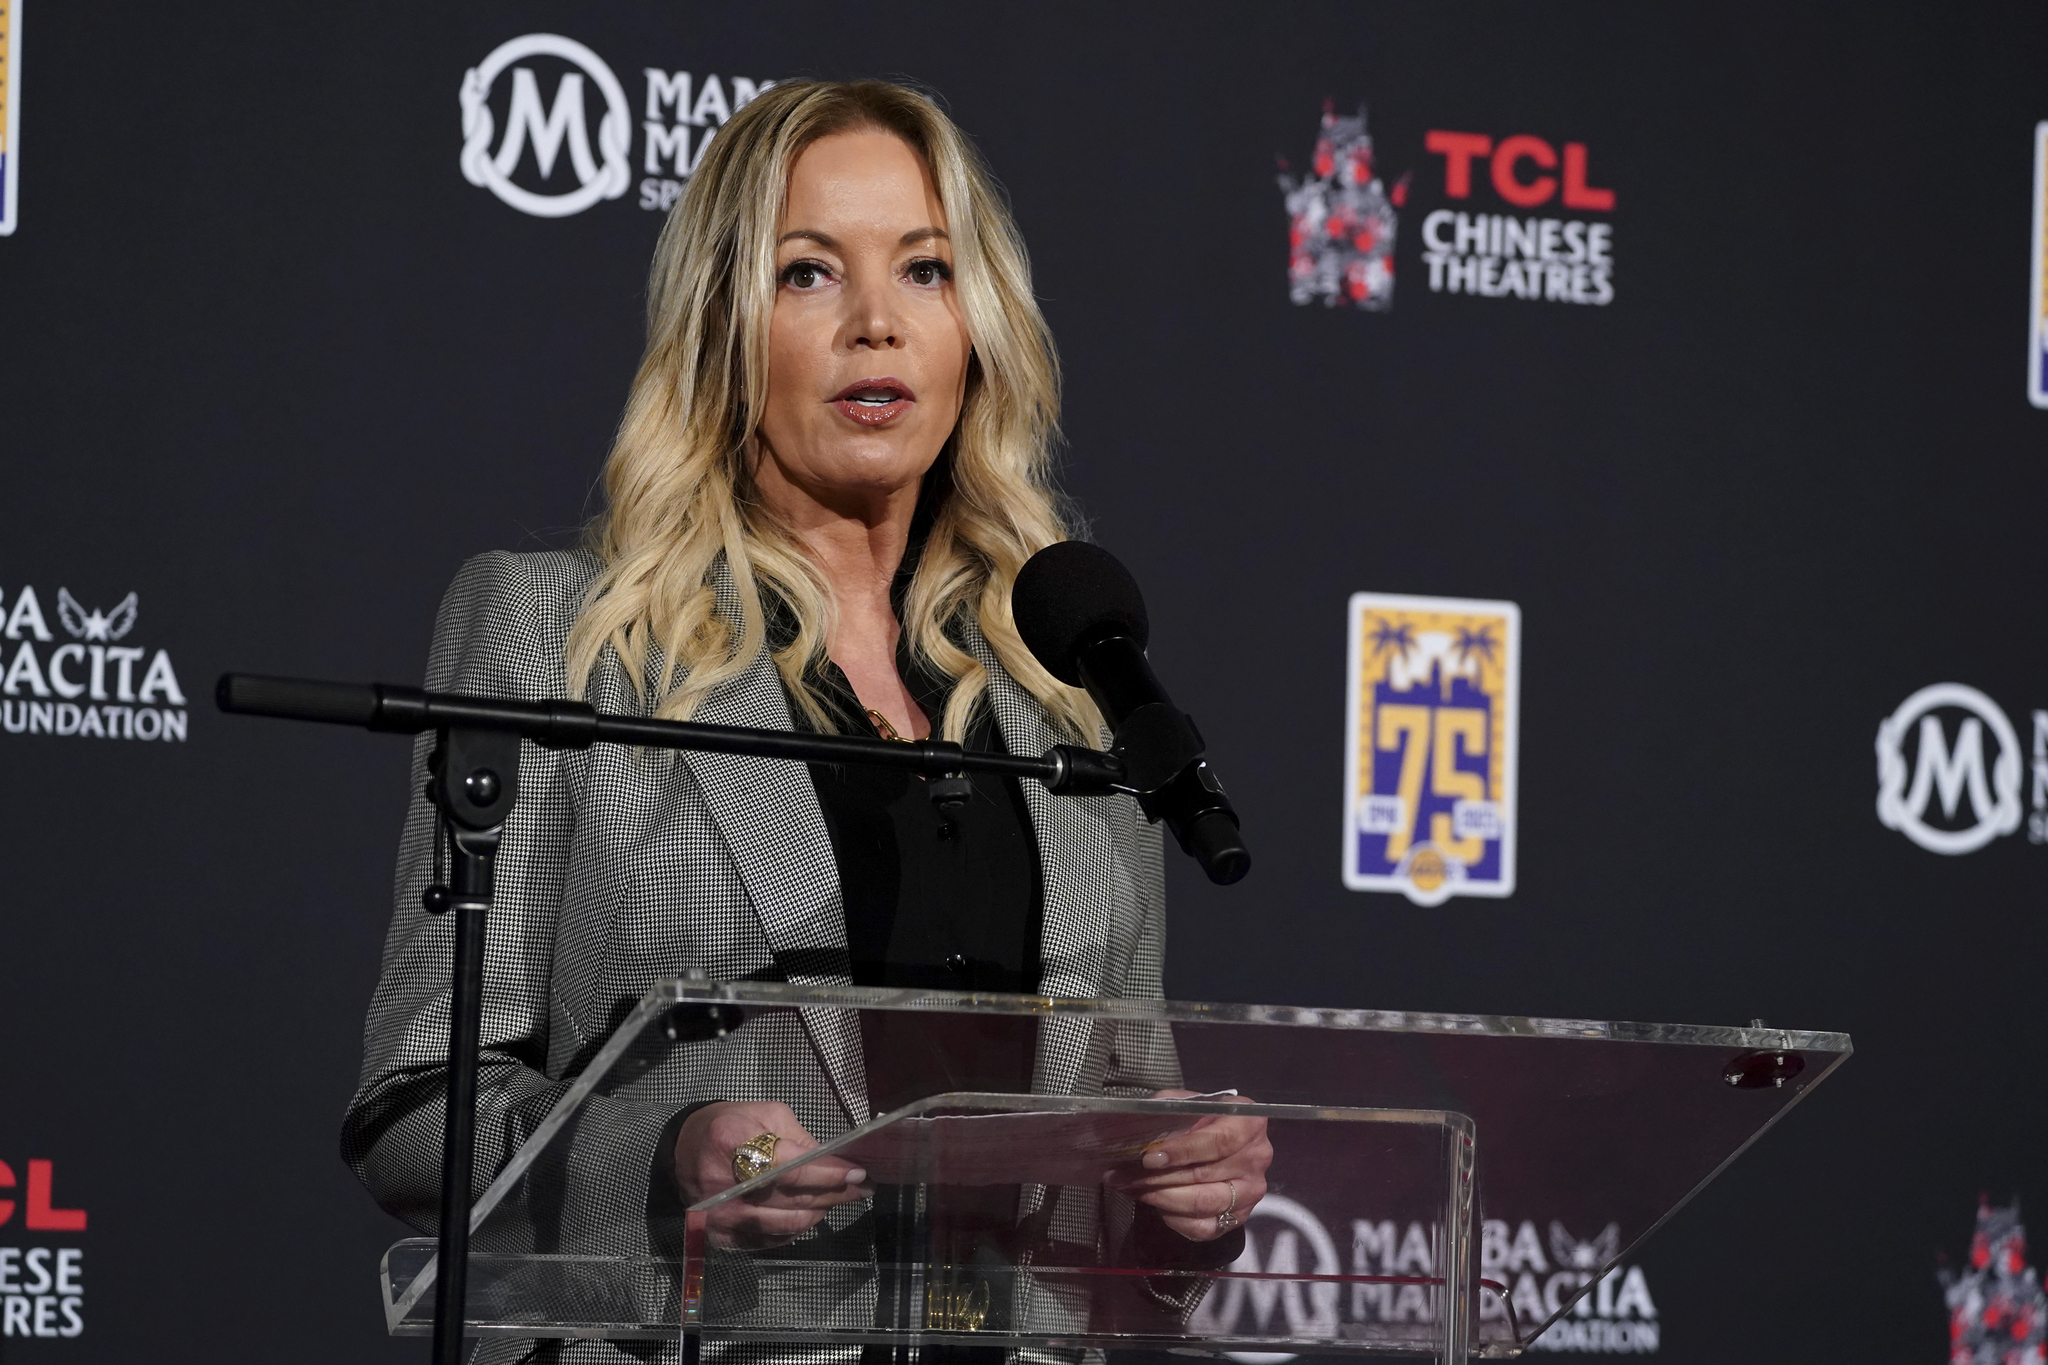 Jeanie Buss reveals that fans still ask her to sign her Playboy issue